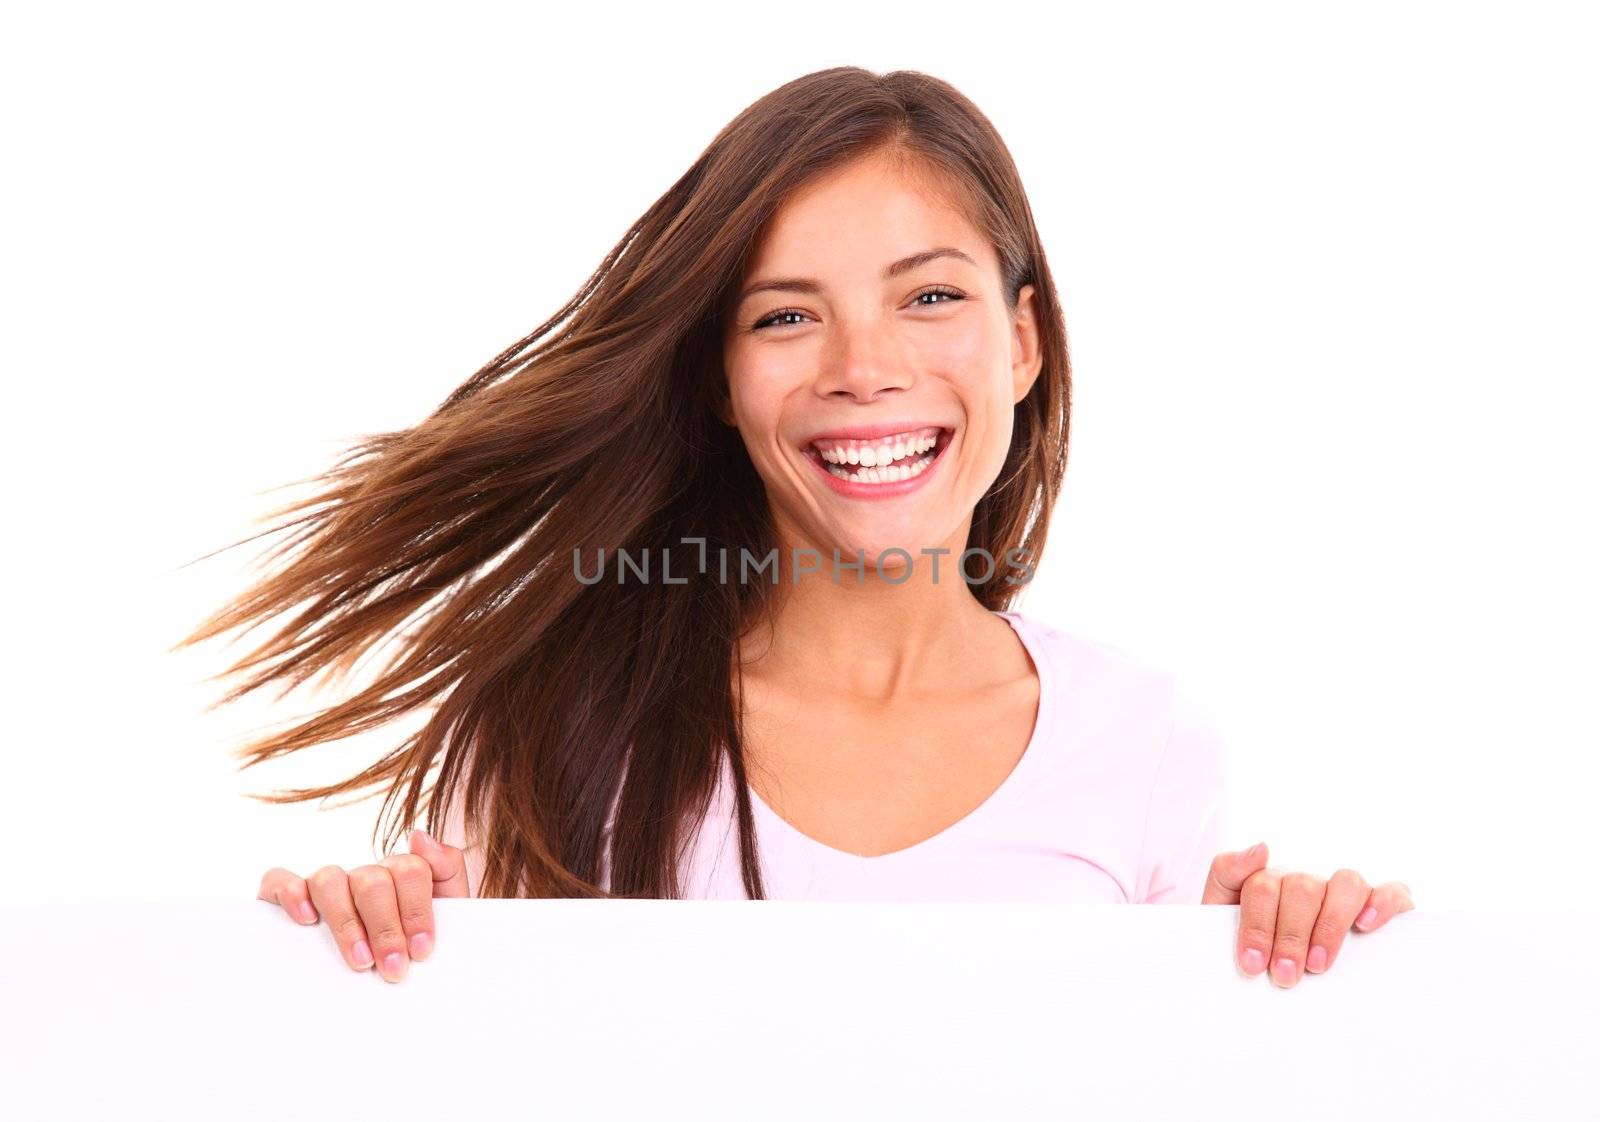 Beautiful woman holding sign. Dynamic image of woman standing behind and holding a white blank board / placard. Beautiful mixed race chinese / caucasian model. Isolated on white background.